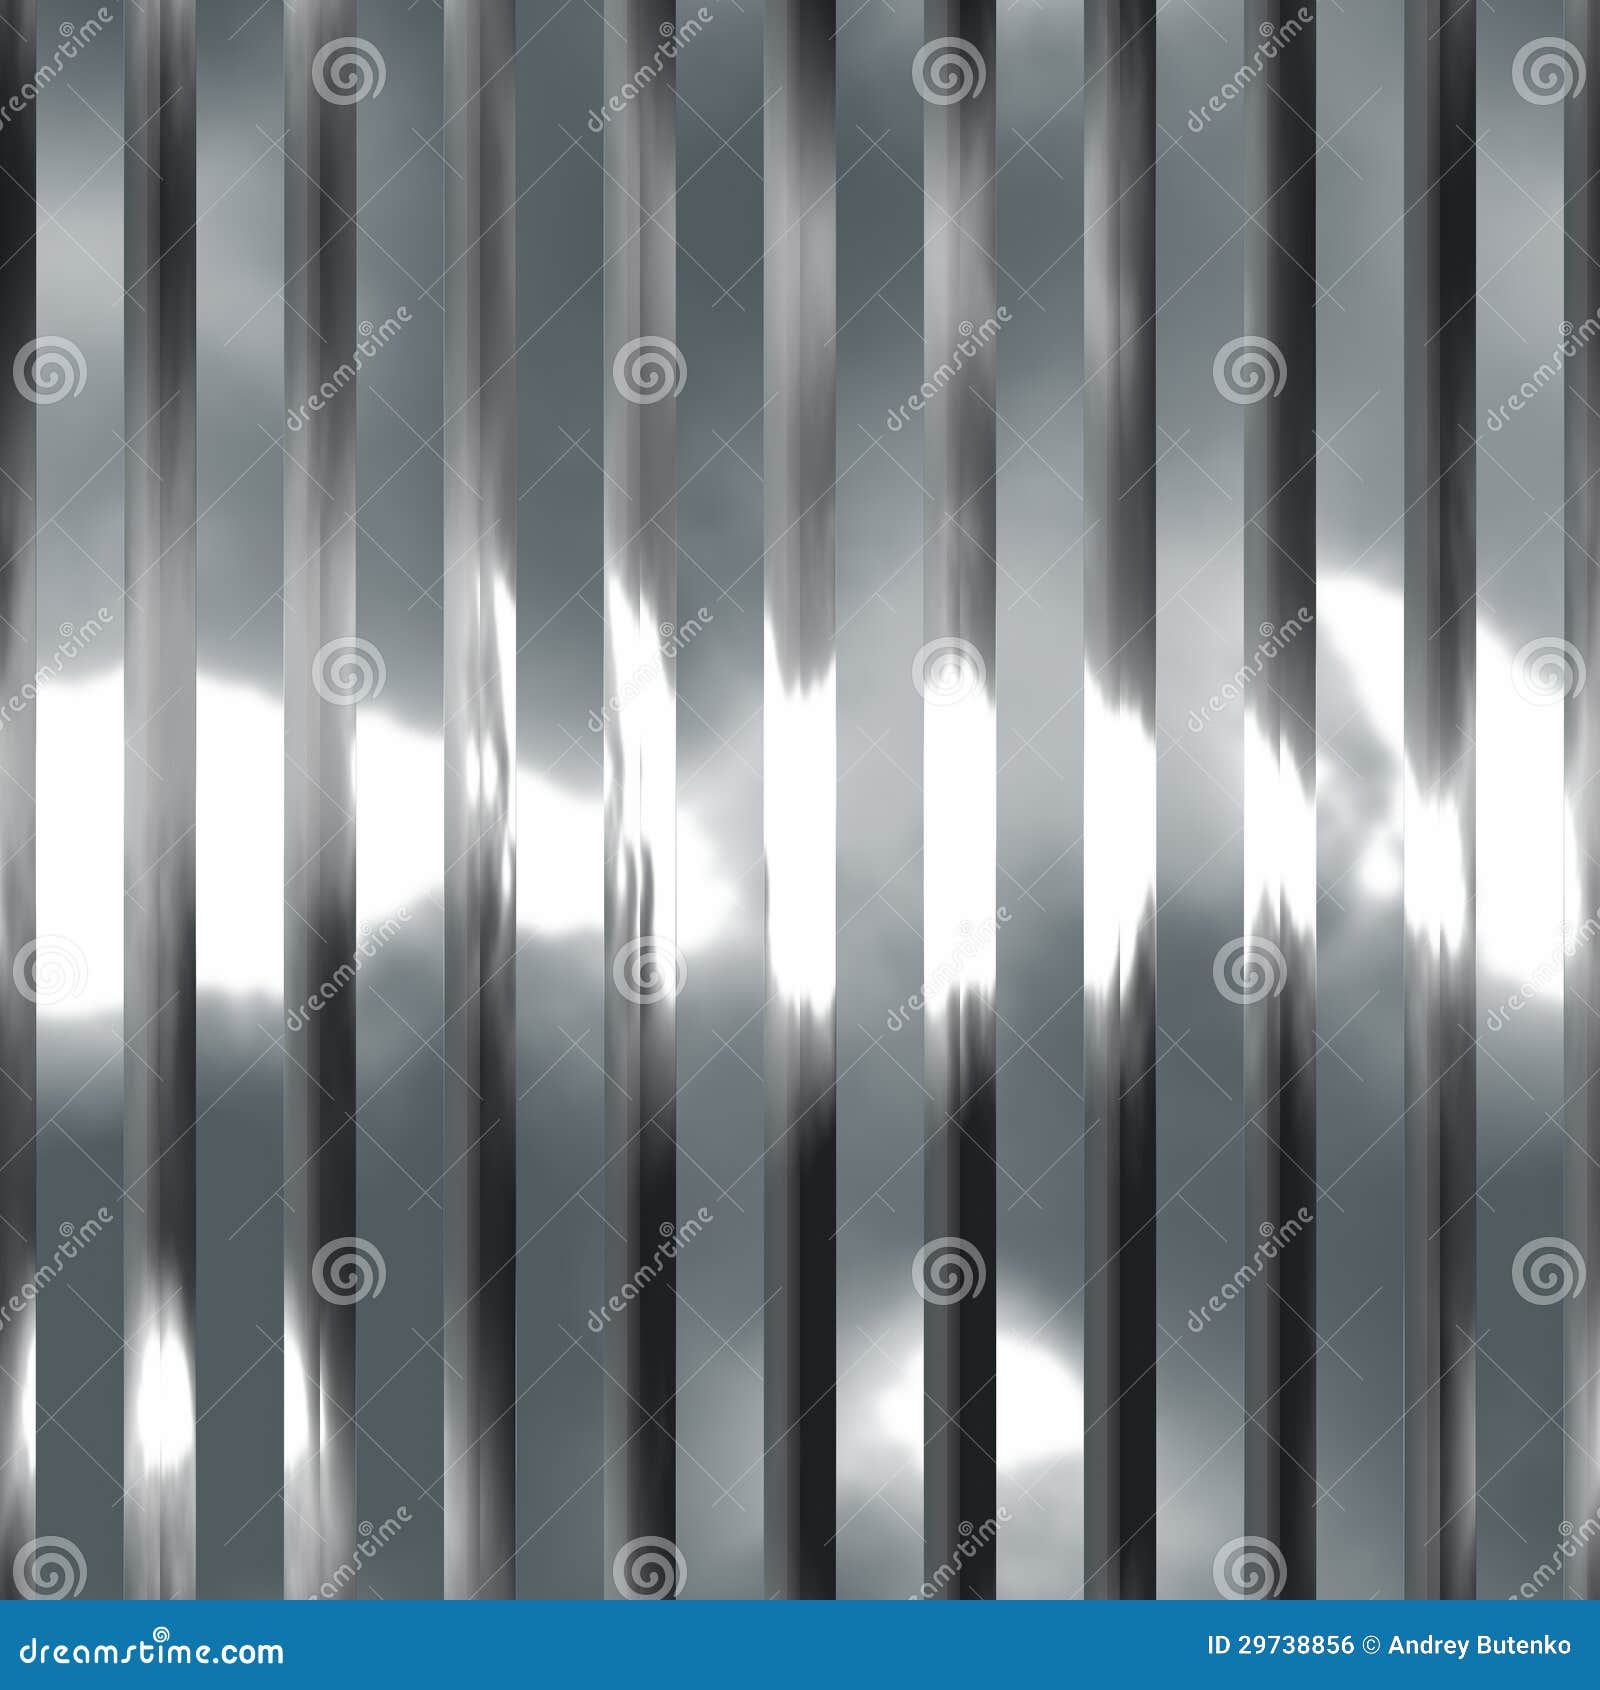 Chrome stock illustration. Illustration of silvery, smooth - 29738856